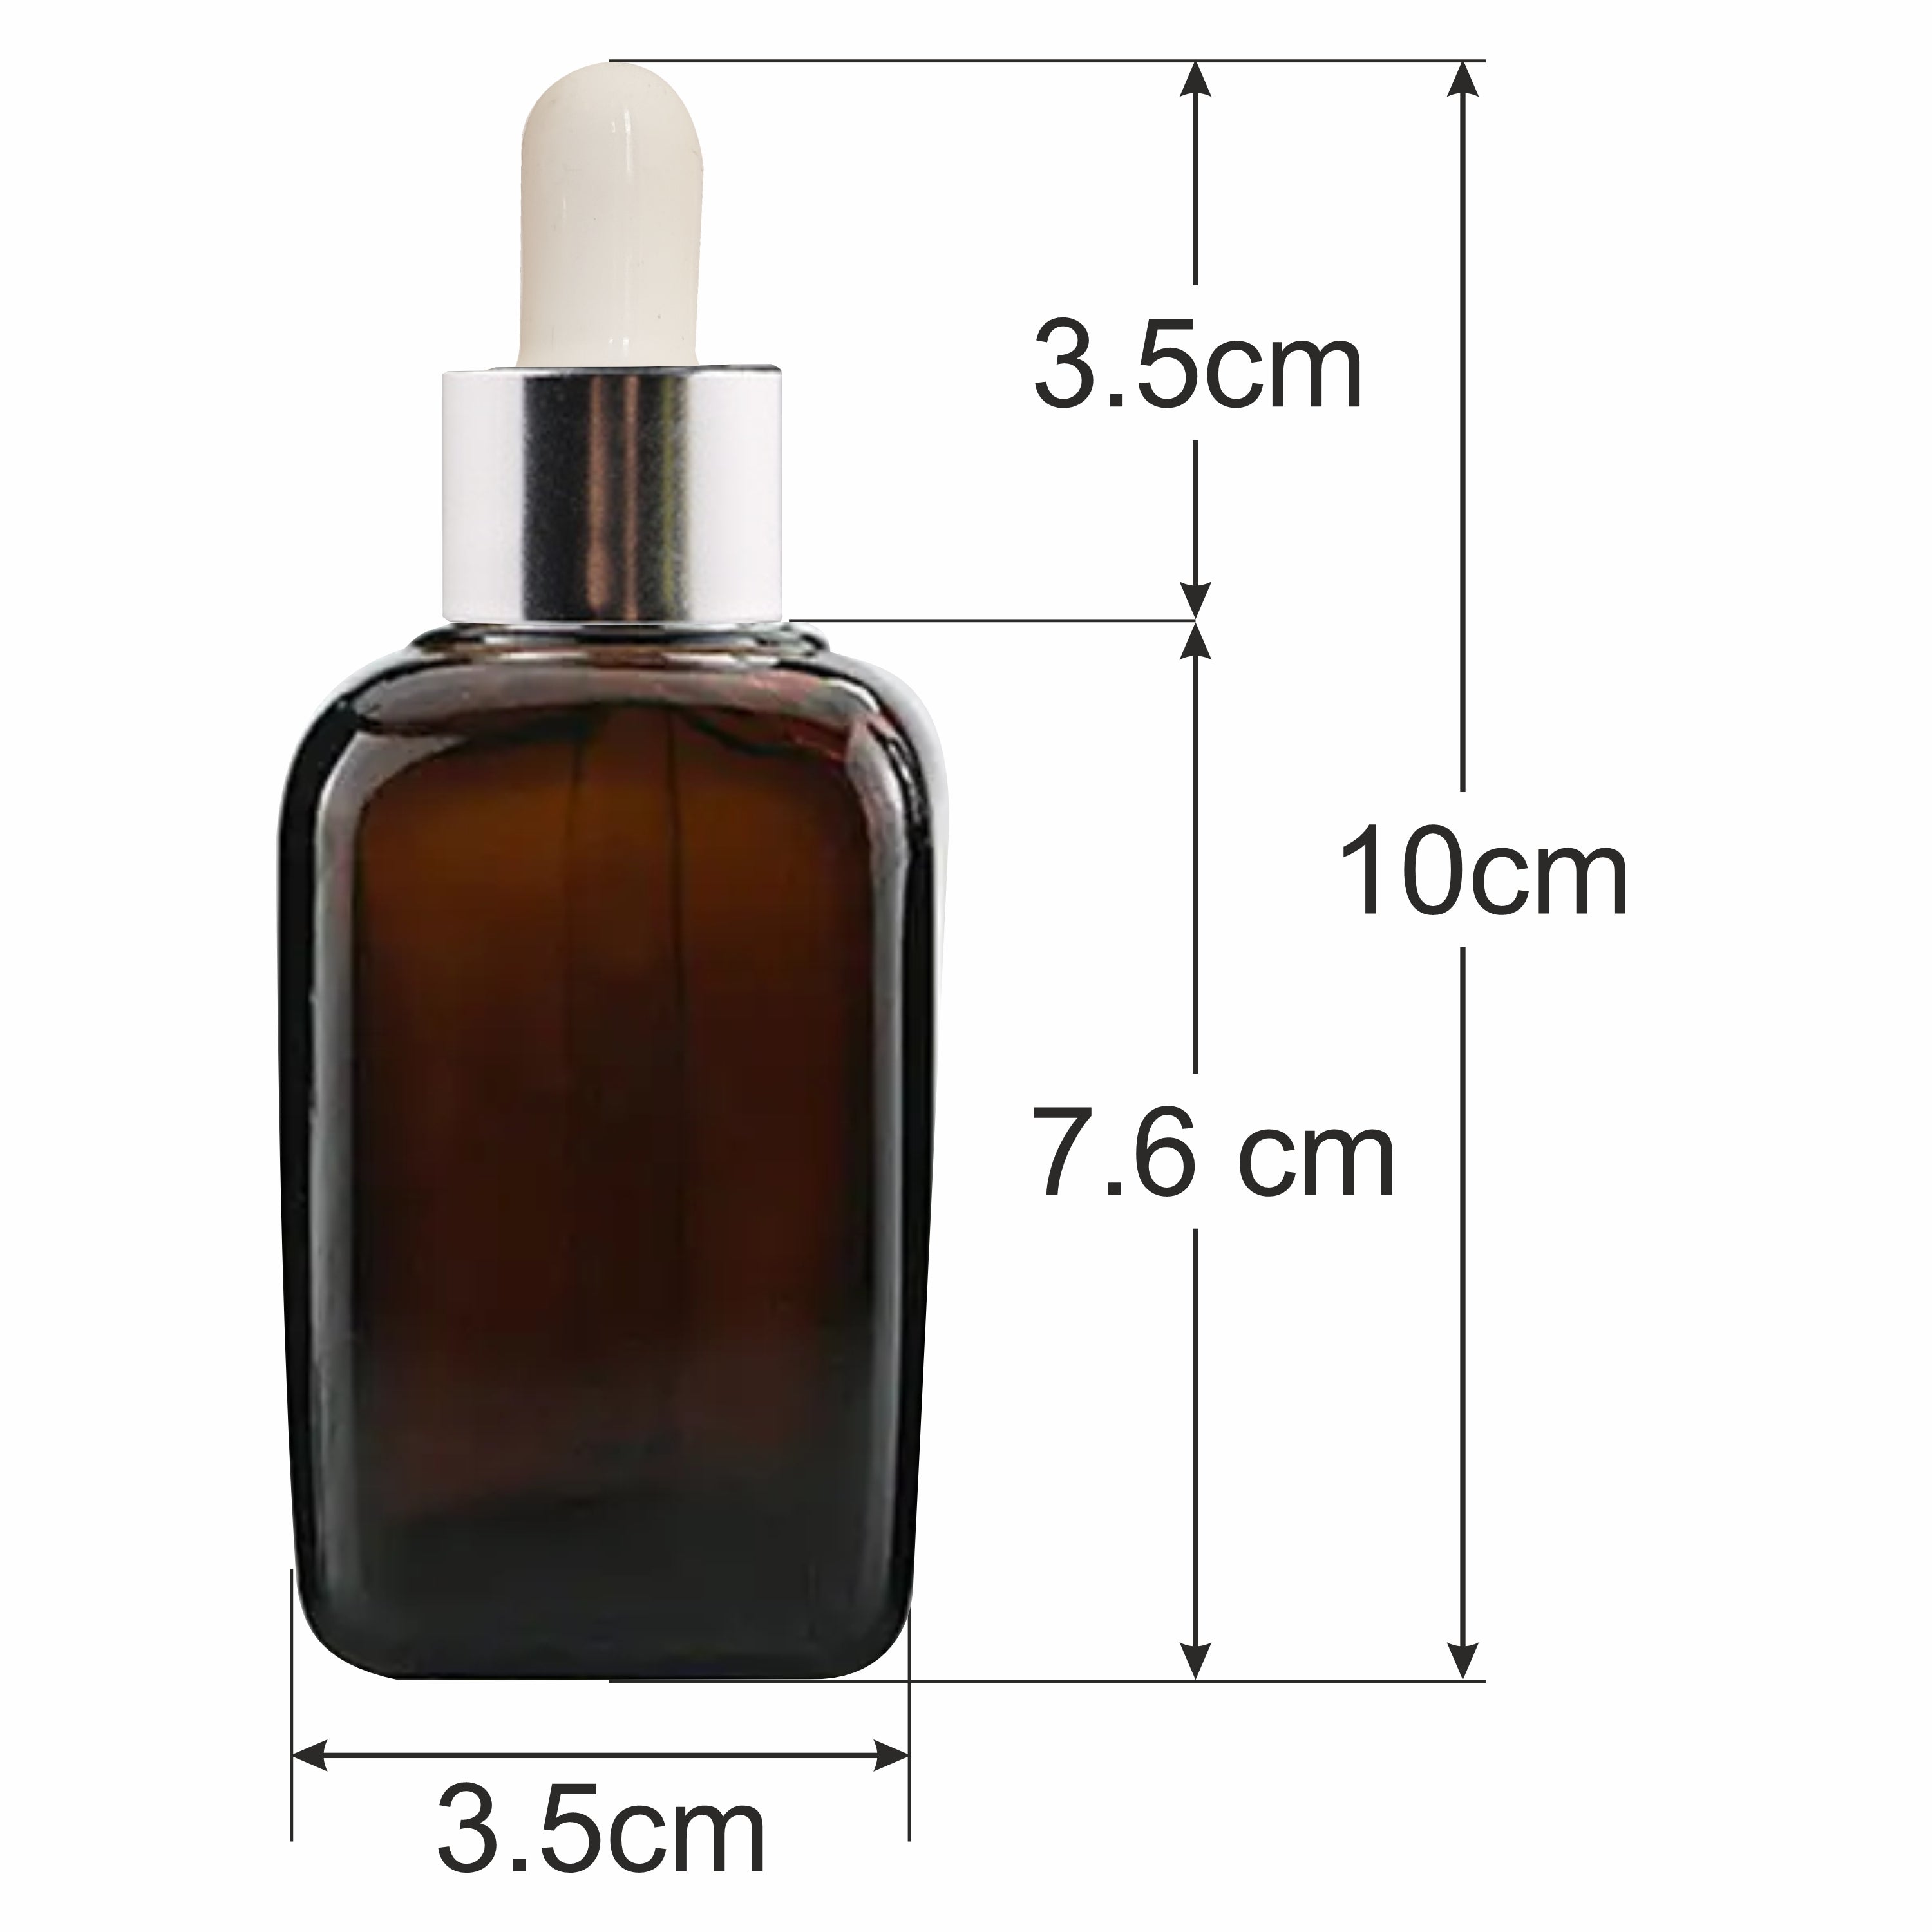 AMBER GLASS BOTTLE WITH SILVER PLATEDD ROPPER, SQUARE SHAPE - 20ml, 25ml, 30ml |ZMG27|